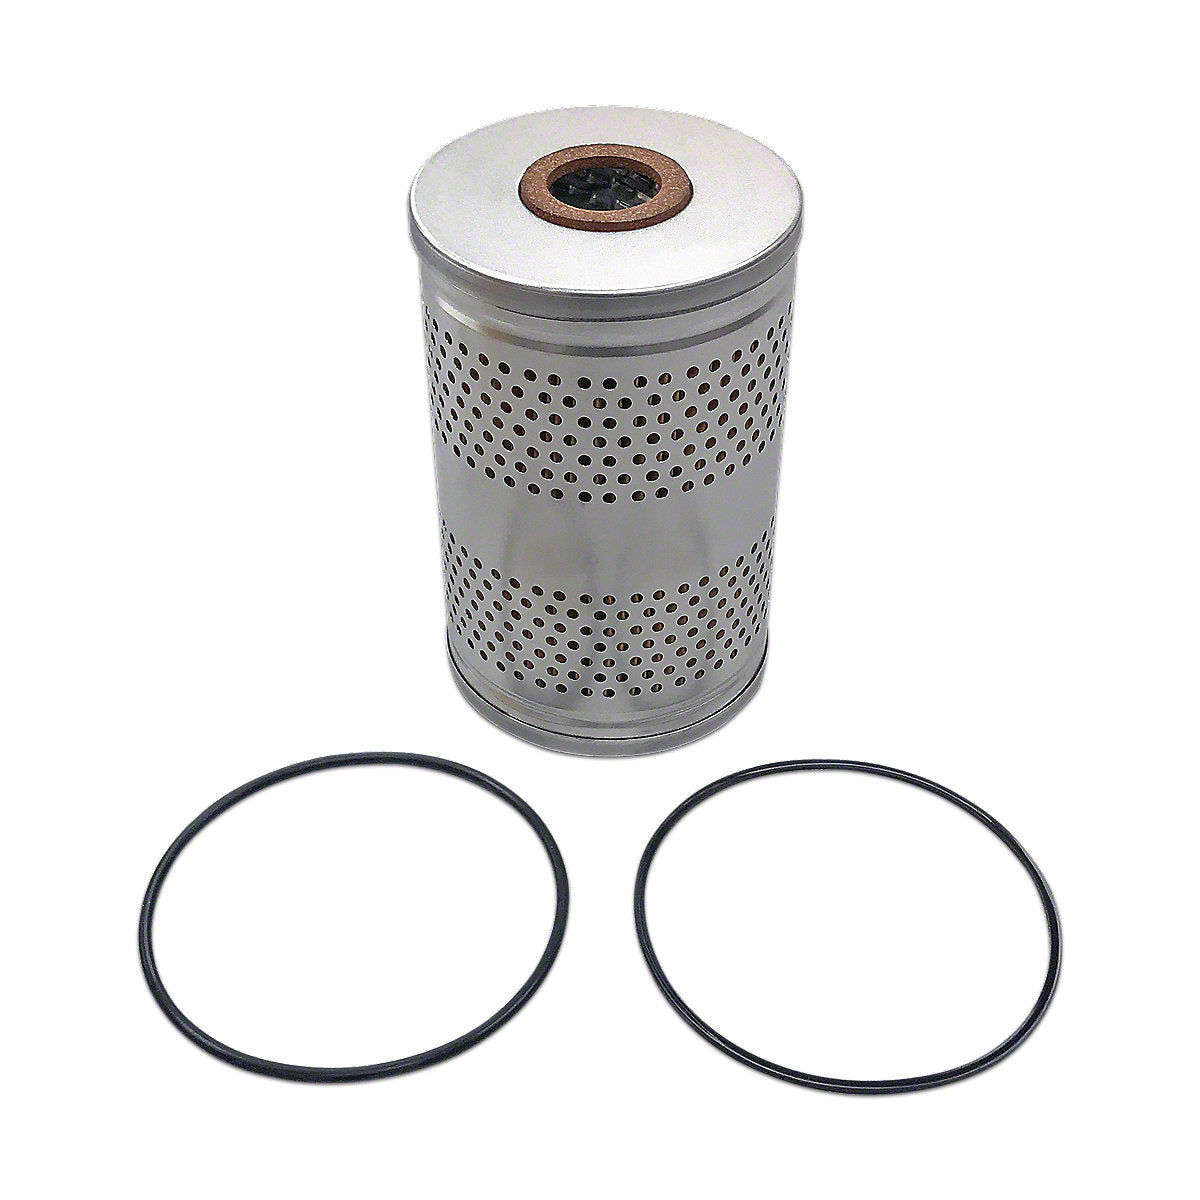 A61234 Hydraulic Filter -Fits  Case  Tractor